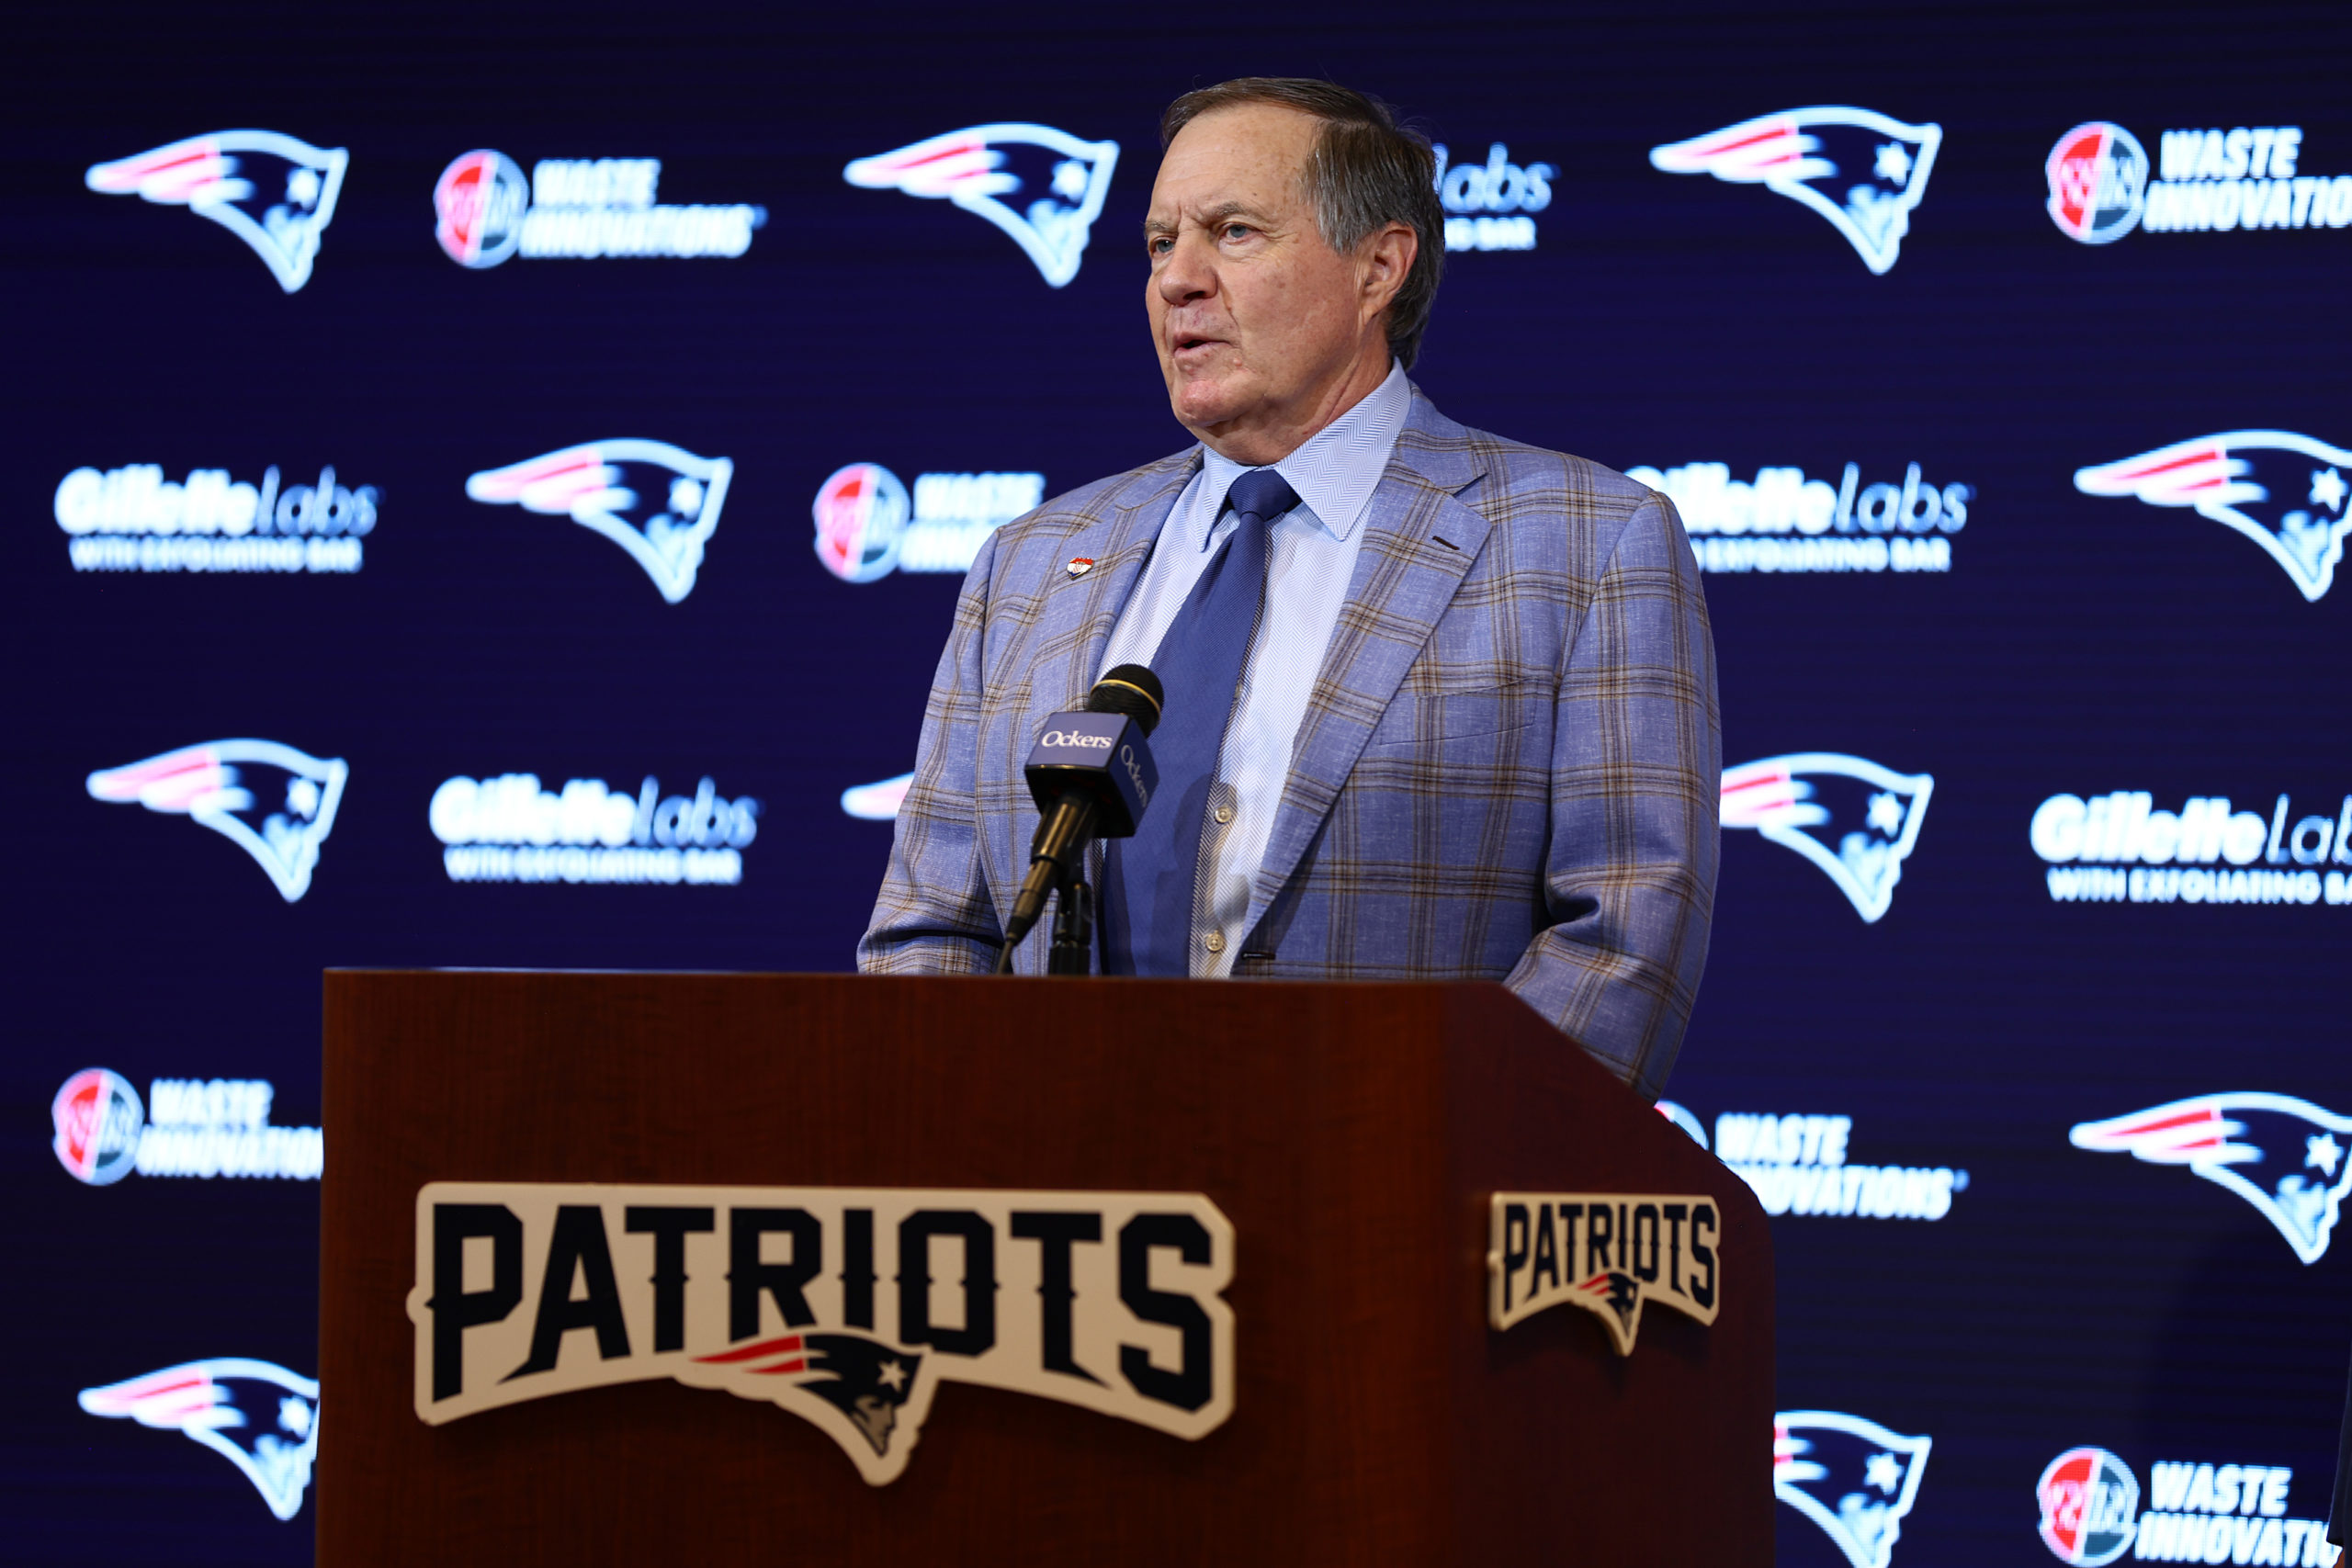 FOXBOROUGH, MASSACHUSETTS - JANUARY 11: Head coach Bill Belichick of the New England Patriots speaks to the media during a press conference at Gillette Stadium on January 11, 2024 in Foxborough, Massachusetts. Belichick announced he is stepping down as head coach after 24 seasons with the team. Maddie Meyer/Getty Images